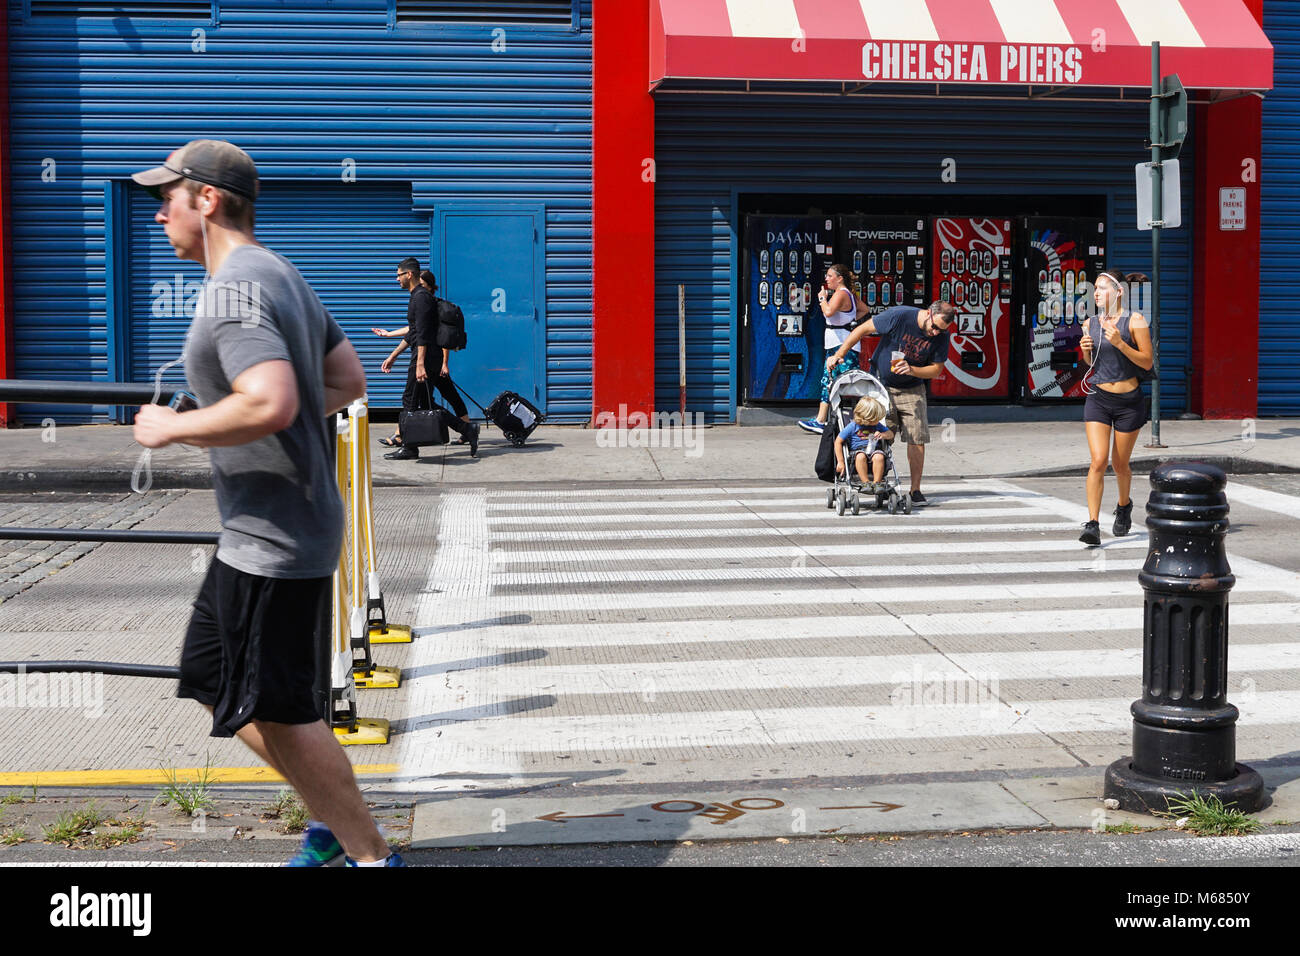 People running and strolling near Chelsea Piers in NYC. Stock Photo